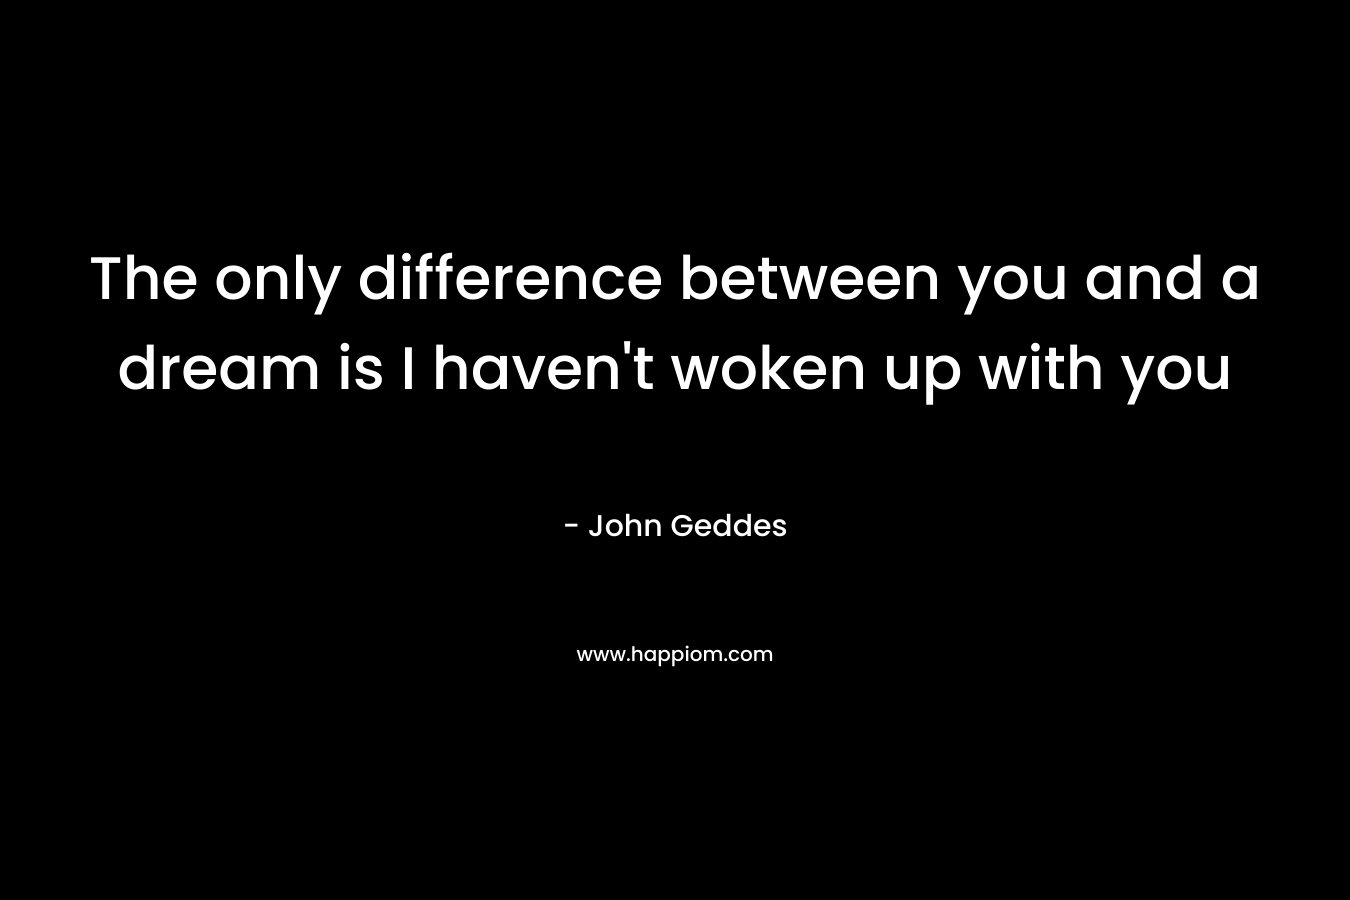 The only difference between you and a dream is I haven’t woken up with you – John Geddes